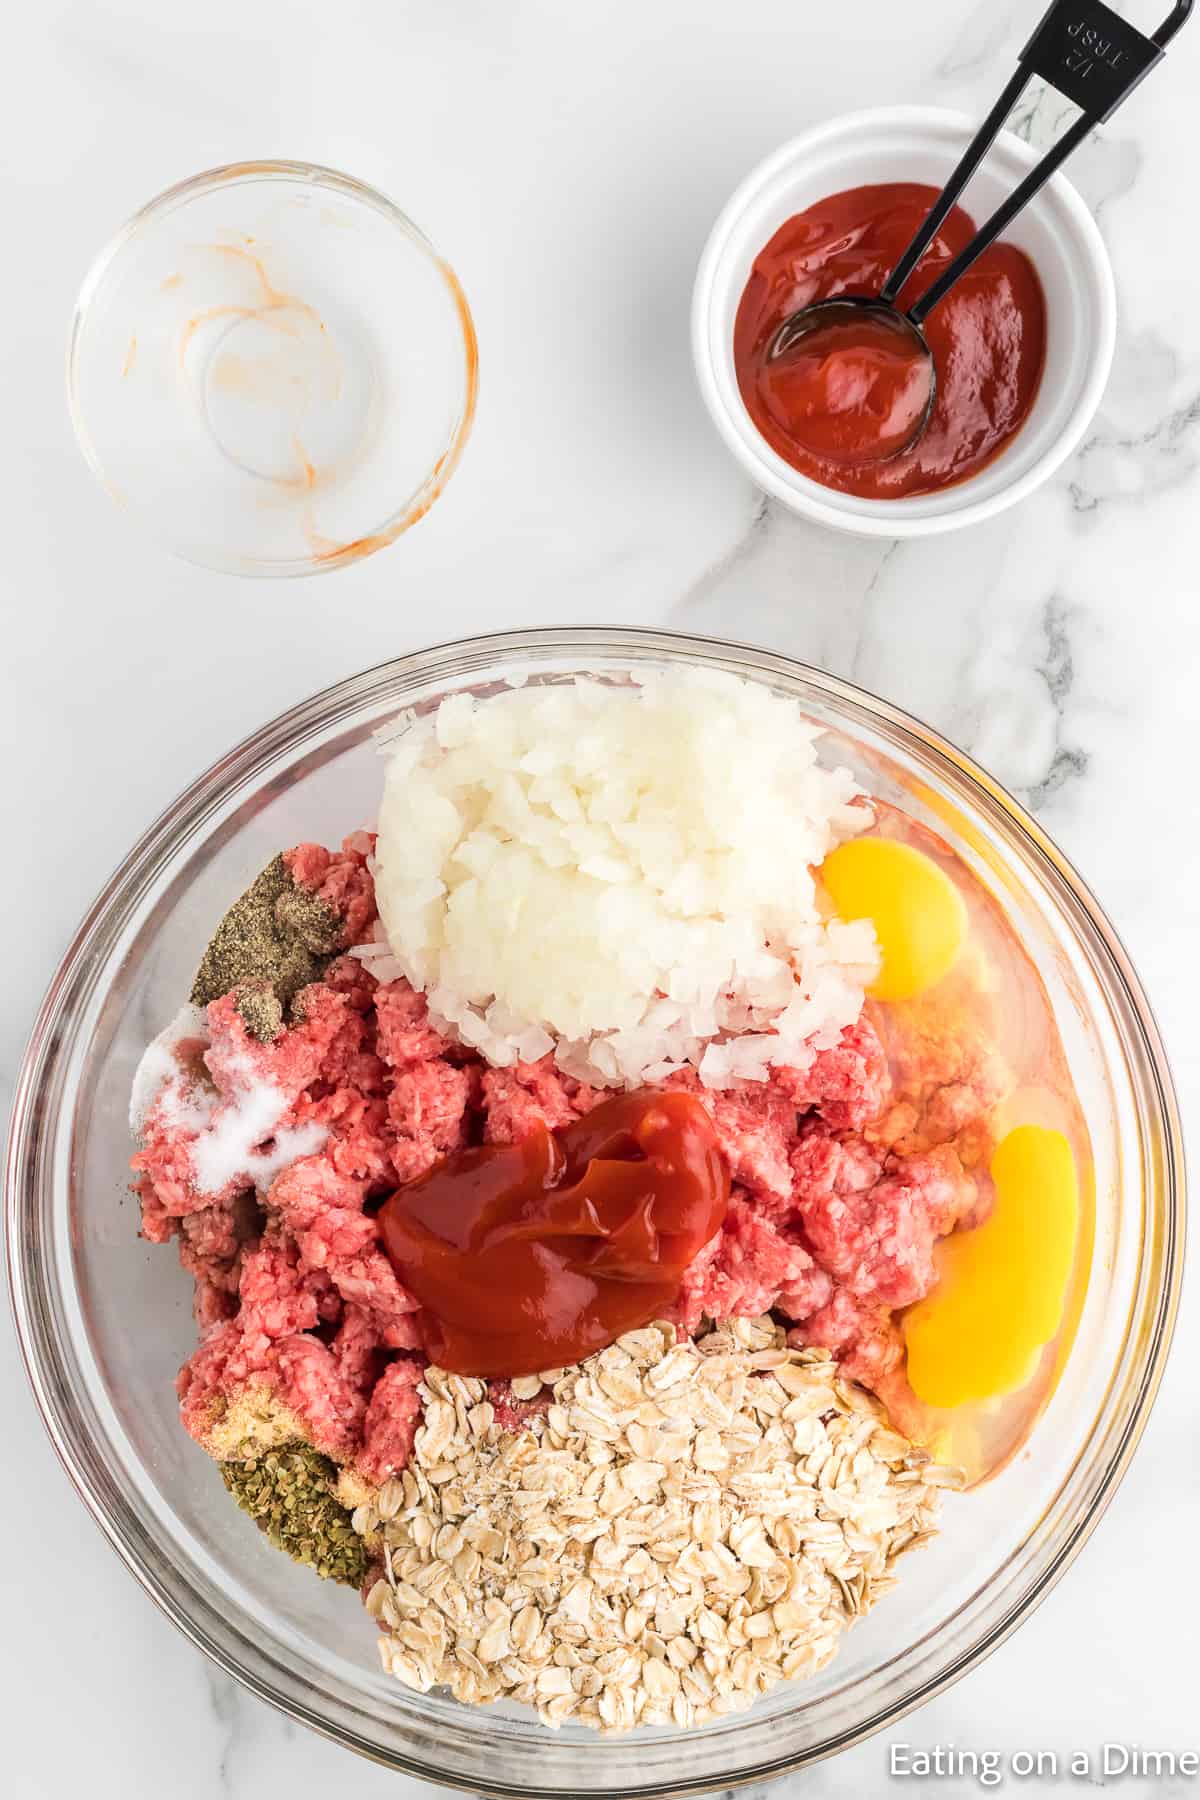 Combining the ground beef with, otas, eggs, onions, ketchup and seasoning in a bowl